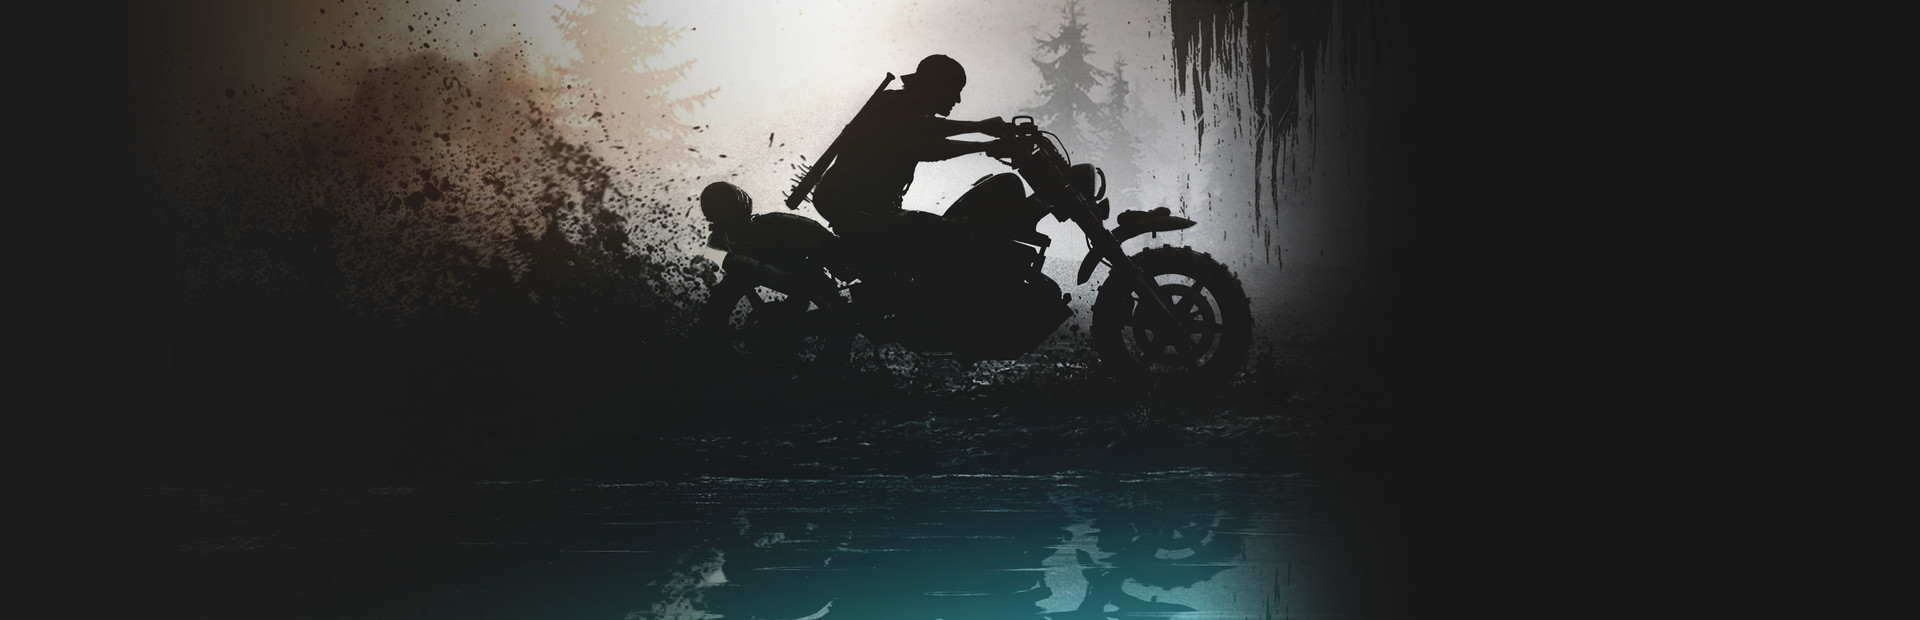 Days Gone cover image